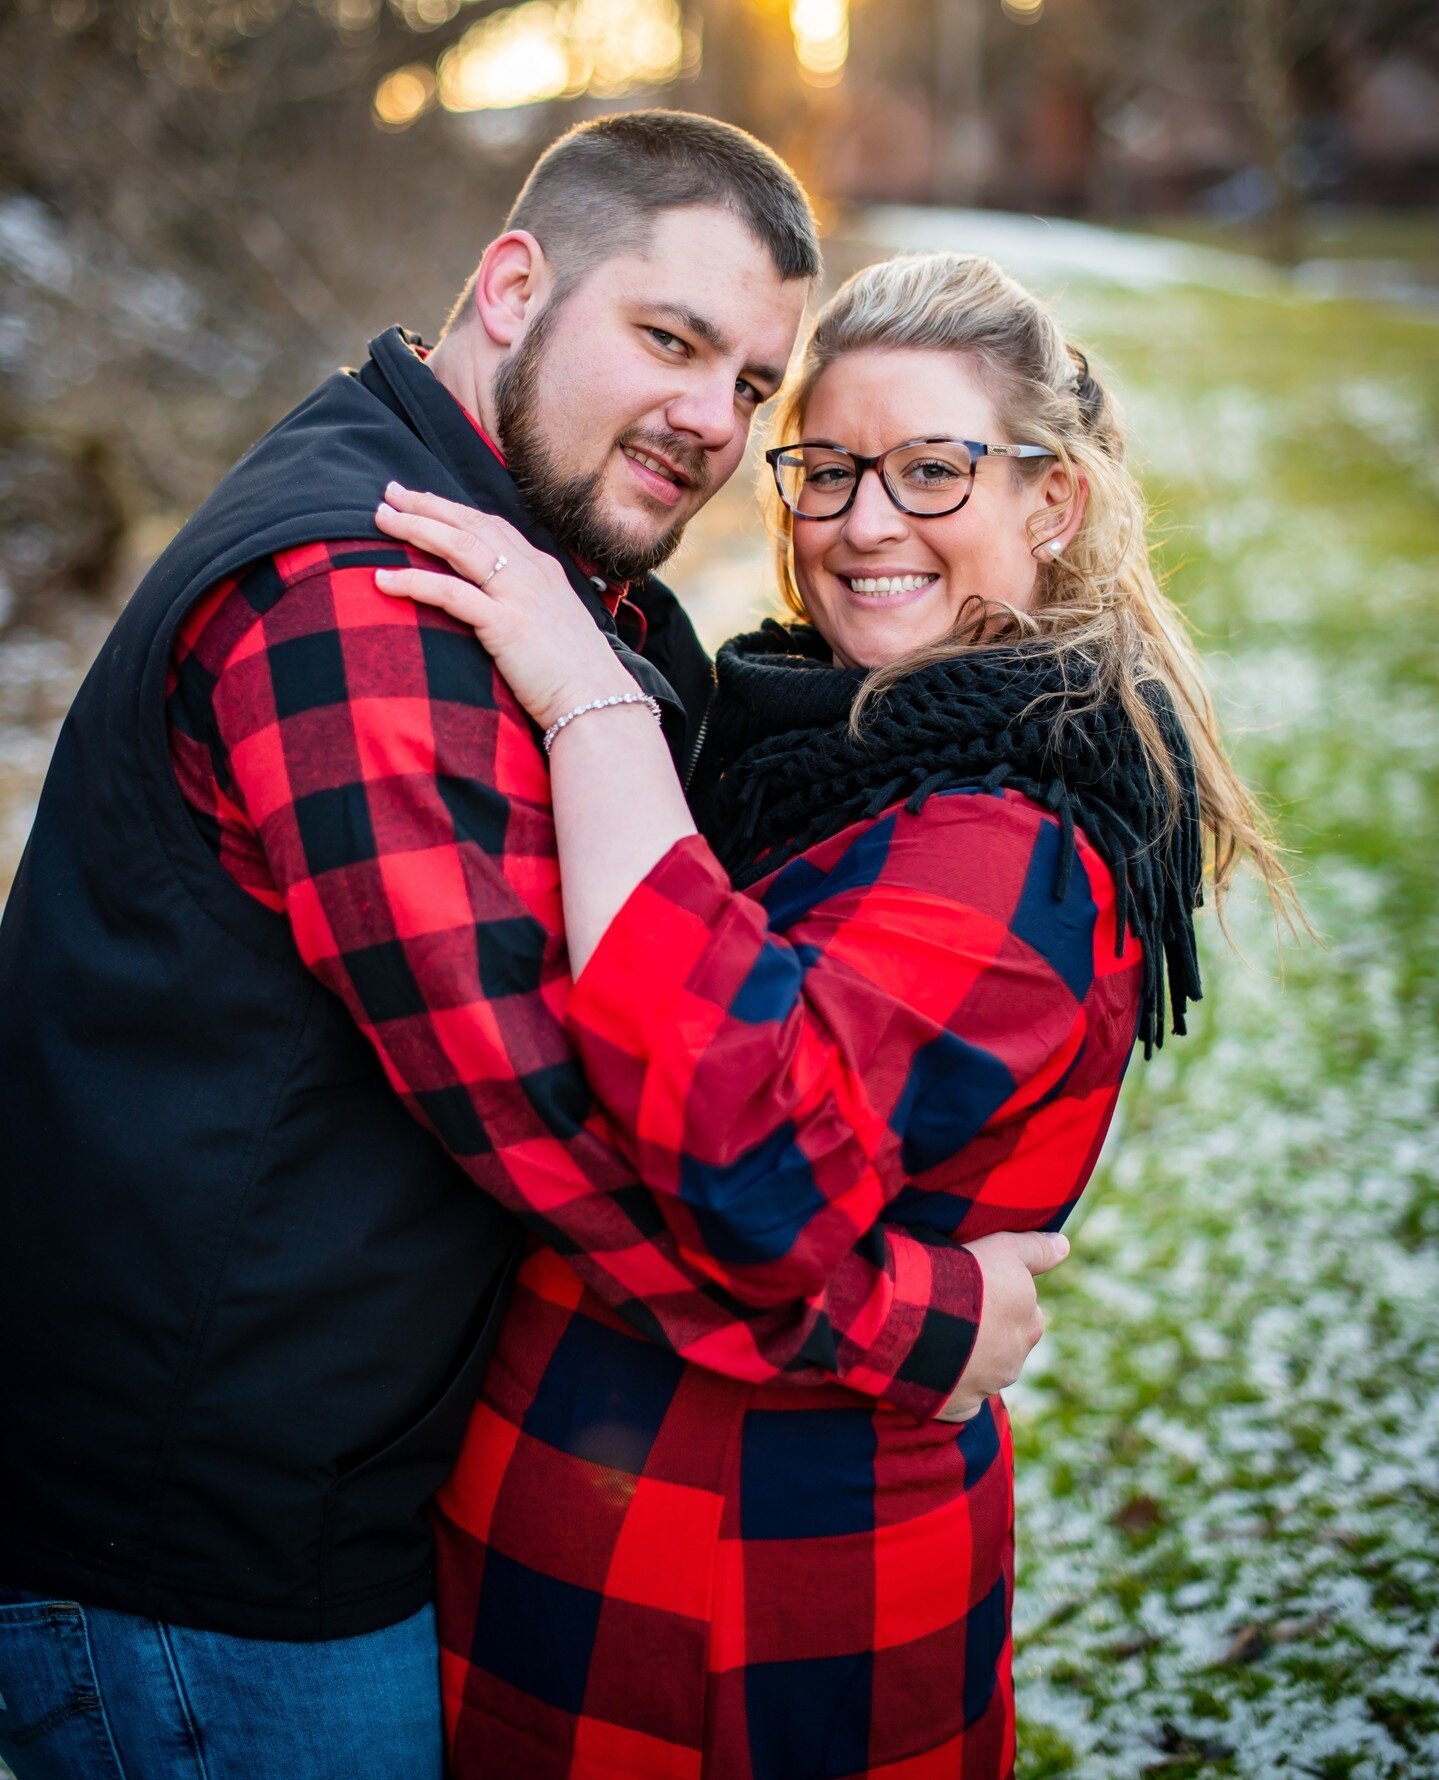 It&rsquo;s Ashley and Clinton&rsquo;s wedding day! I&rsquo;ll never forget the frigid March afternoon we got together to shoot their engagement photos. Now it&rsquo;s time to get them married! Congratulations, Mr. and Mrs. Haas!⁠
&bull;⁠
&bull;⁠
Eliz